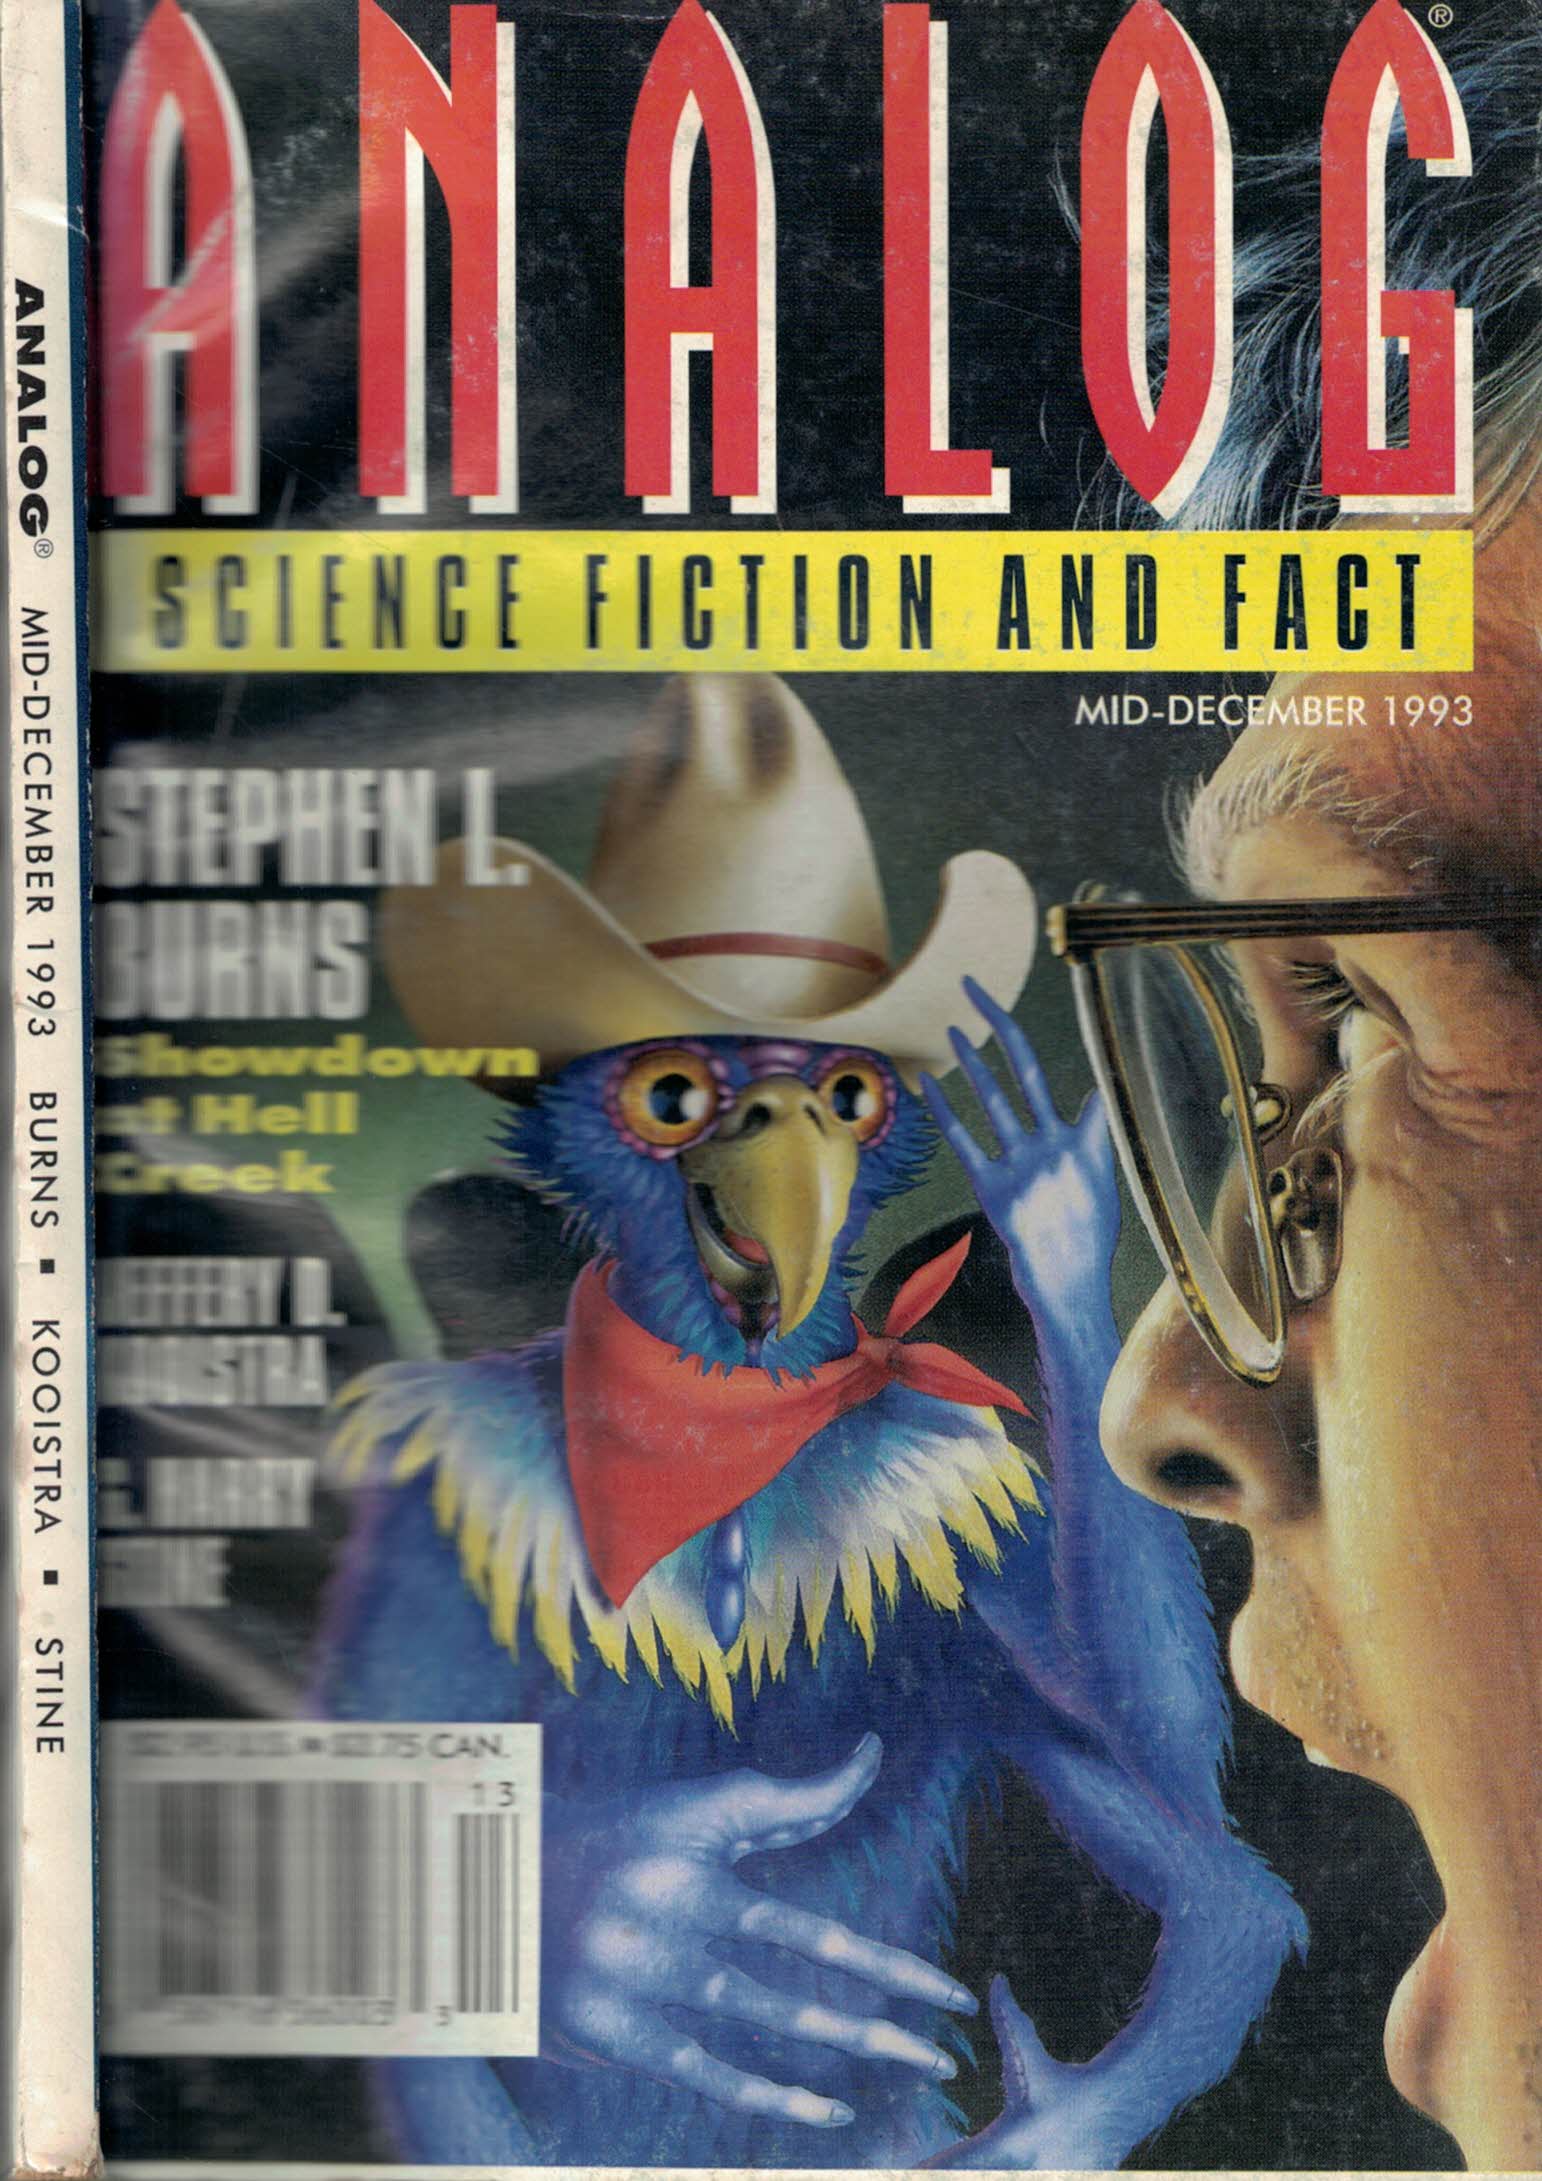 Analog. Science Fiction and Fact. Volume 113, Number 15. Mid-December 1993.